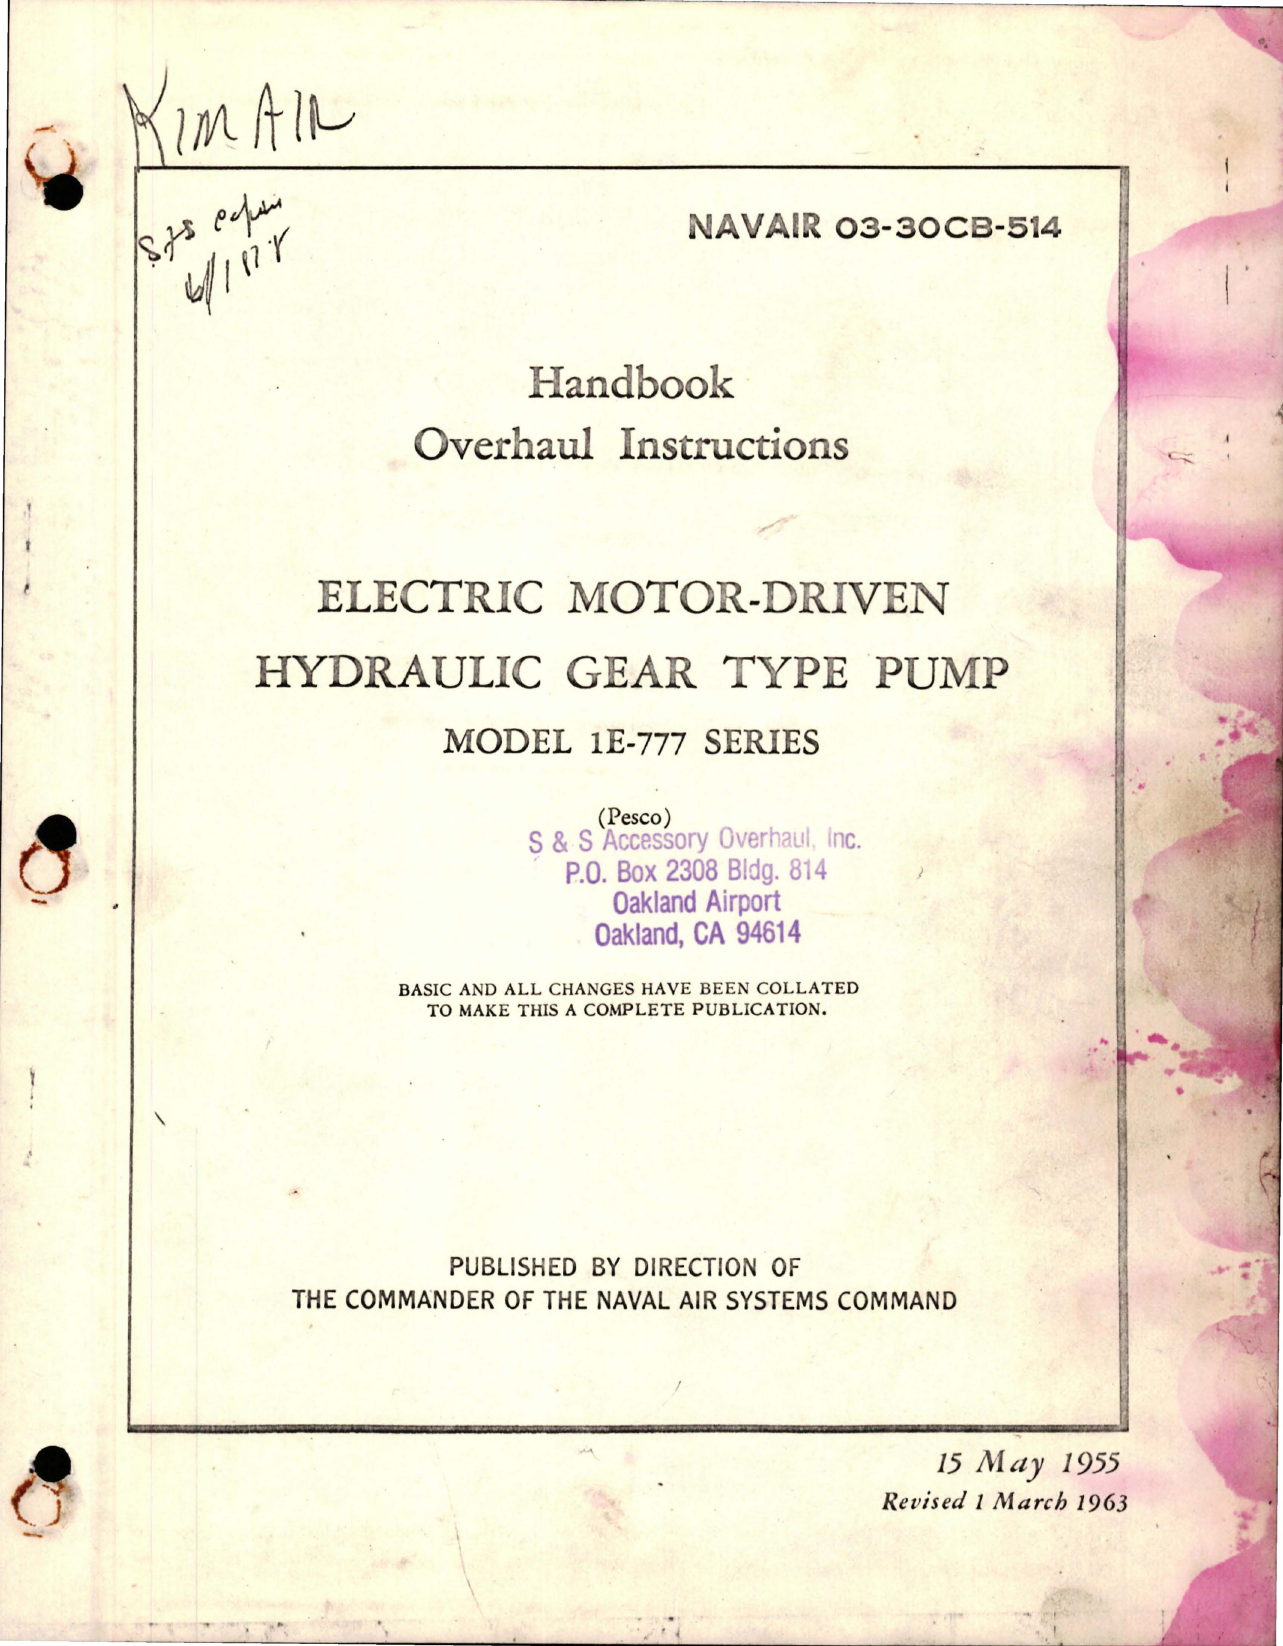 Sample page 1 from AirCorps Library document: Overhaul Instructions for Electric Motor-Driven Hydraulic Gear Type Pump - Model 1E-777 Series